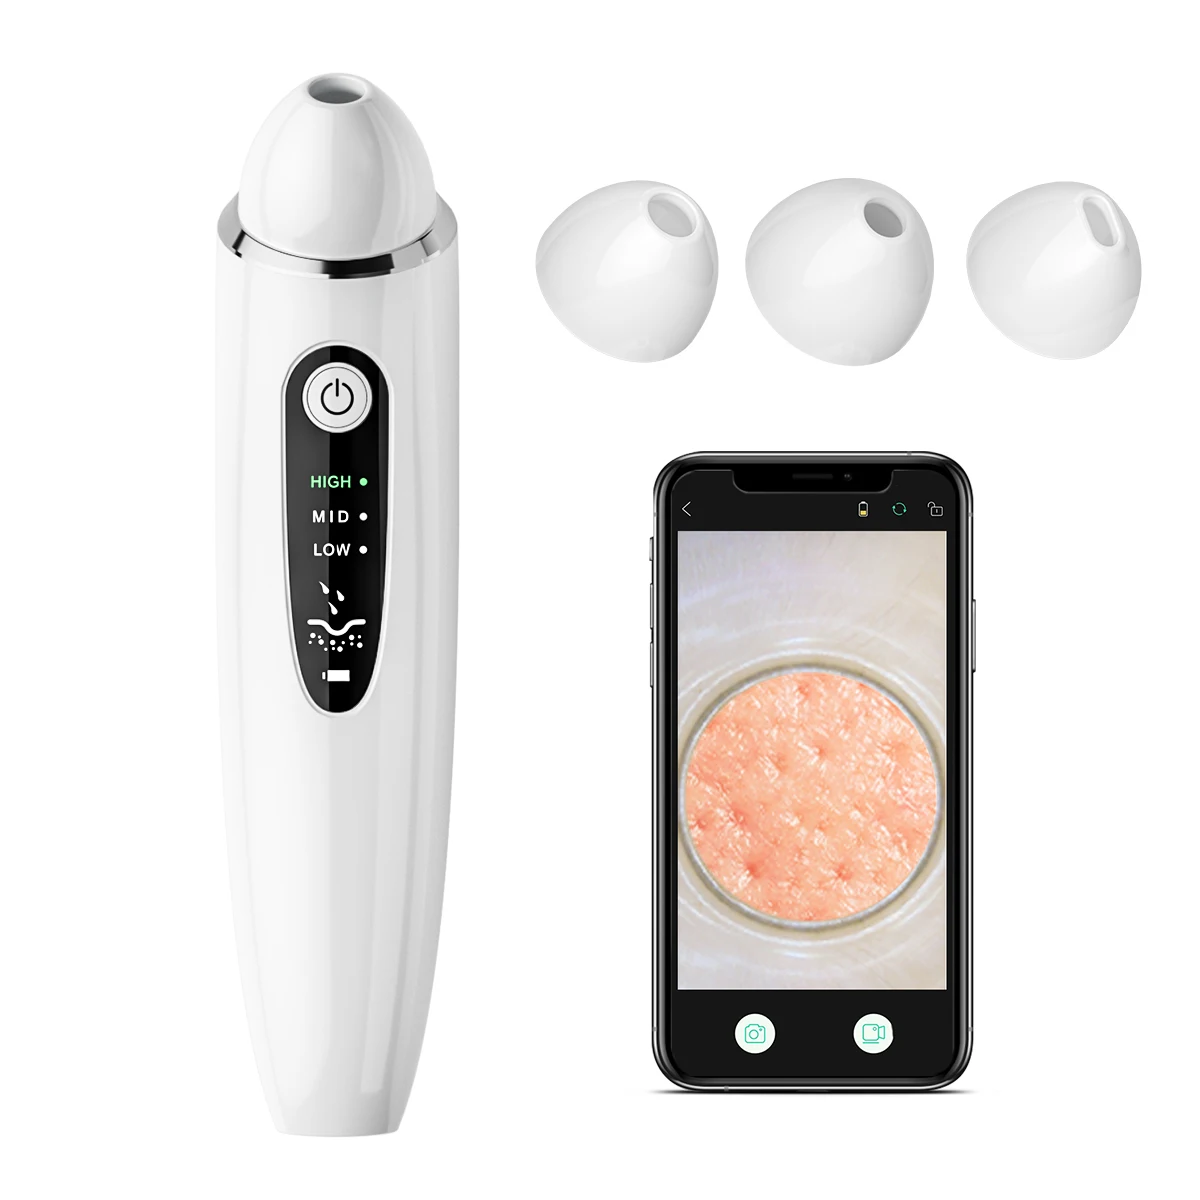 

2021 New Model H500 Hot Sale 20x HD Black Spot Soaking Beauty Equipment Blackhead Remover Vacuum Suction with Camera, White color